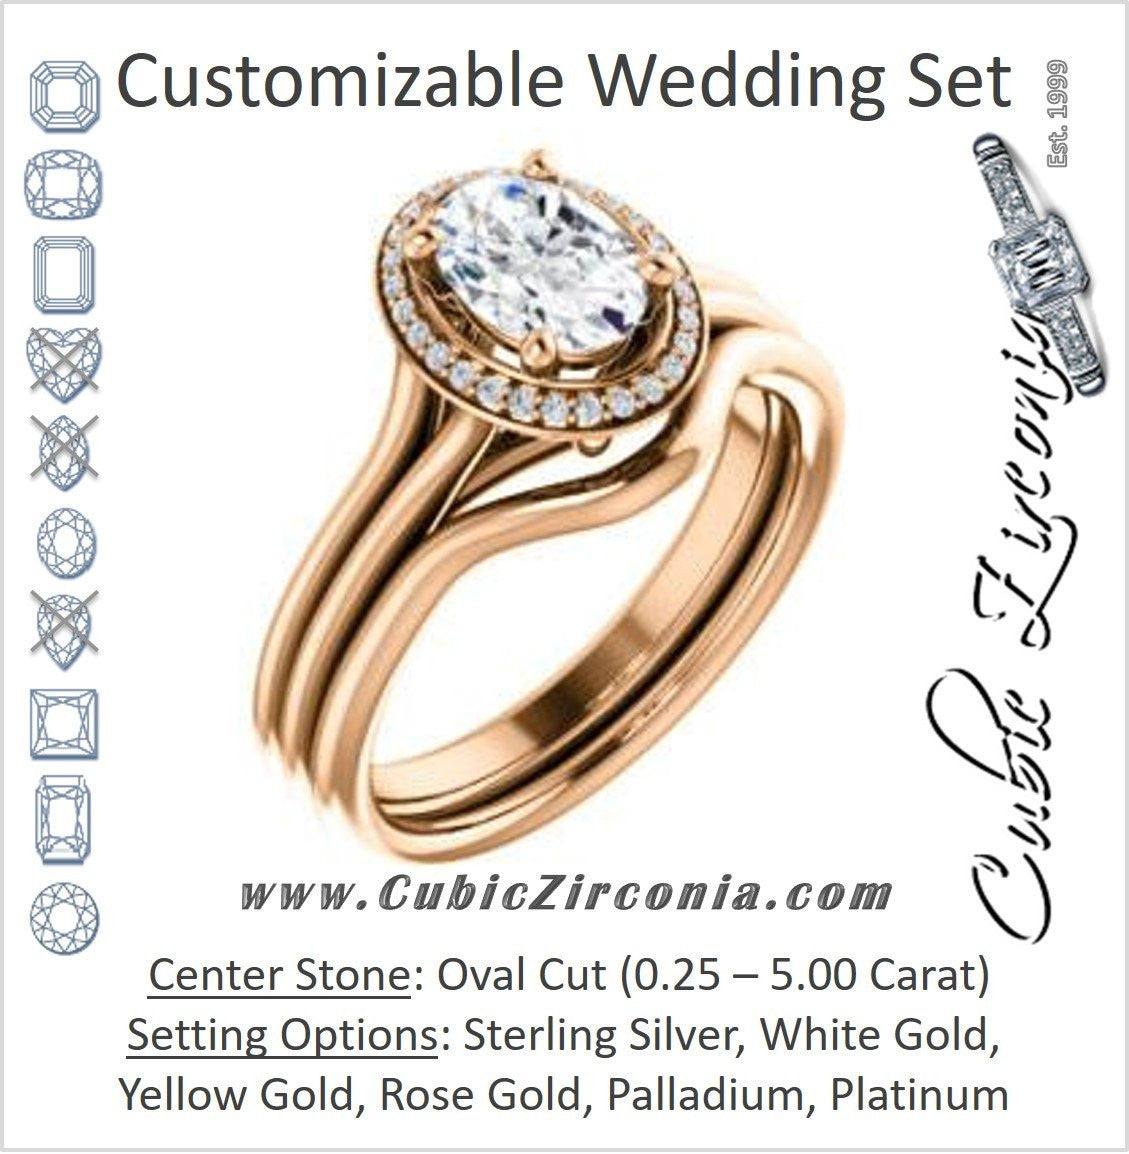 CZ Wedding Set, featuring The Jaci engagement ring (Customizable Cathedral-set Oval Cut Design with Split-Band and Halo Accents)